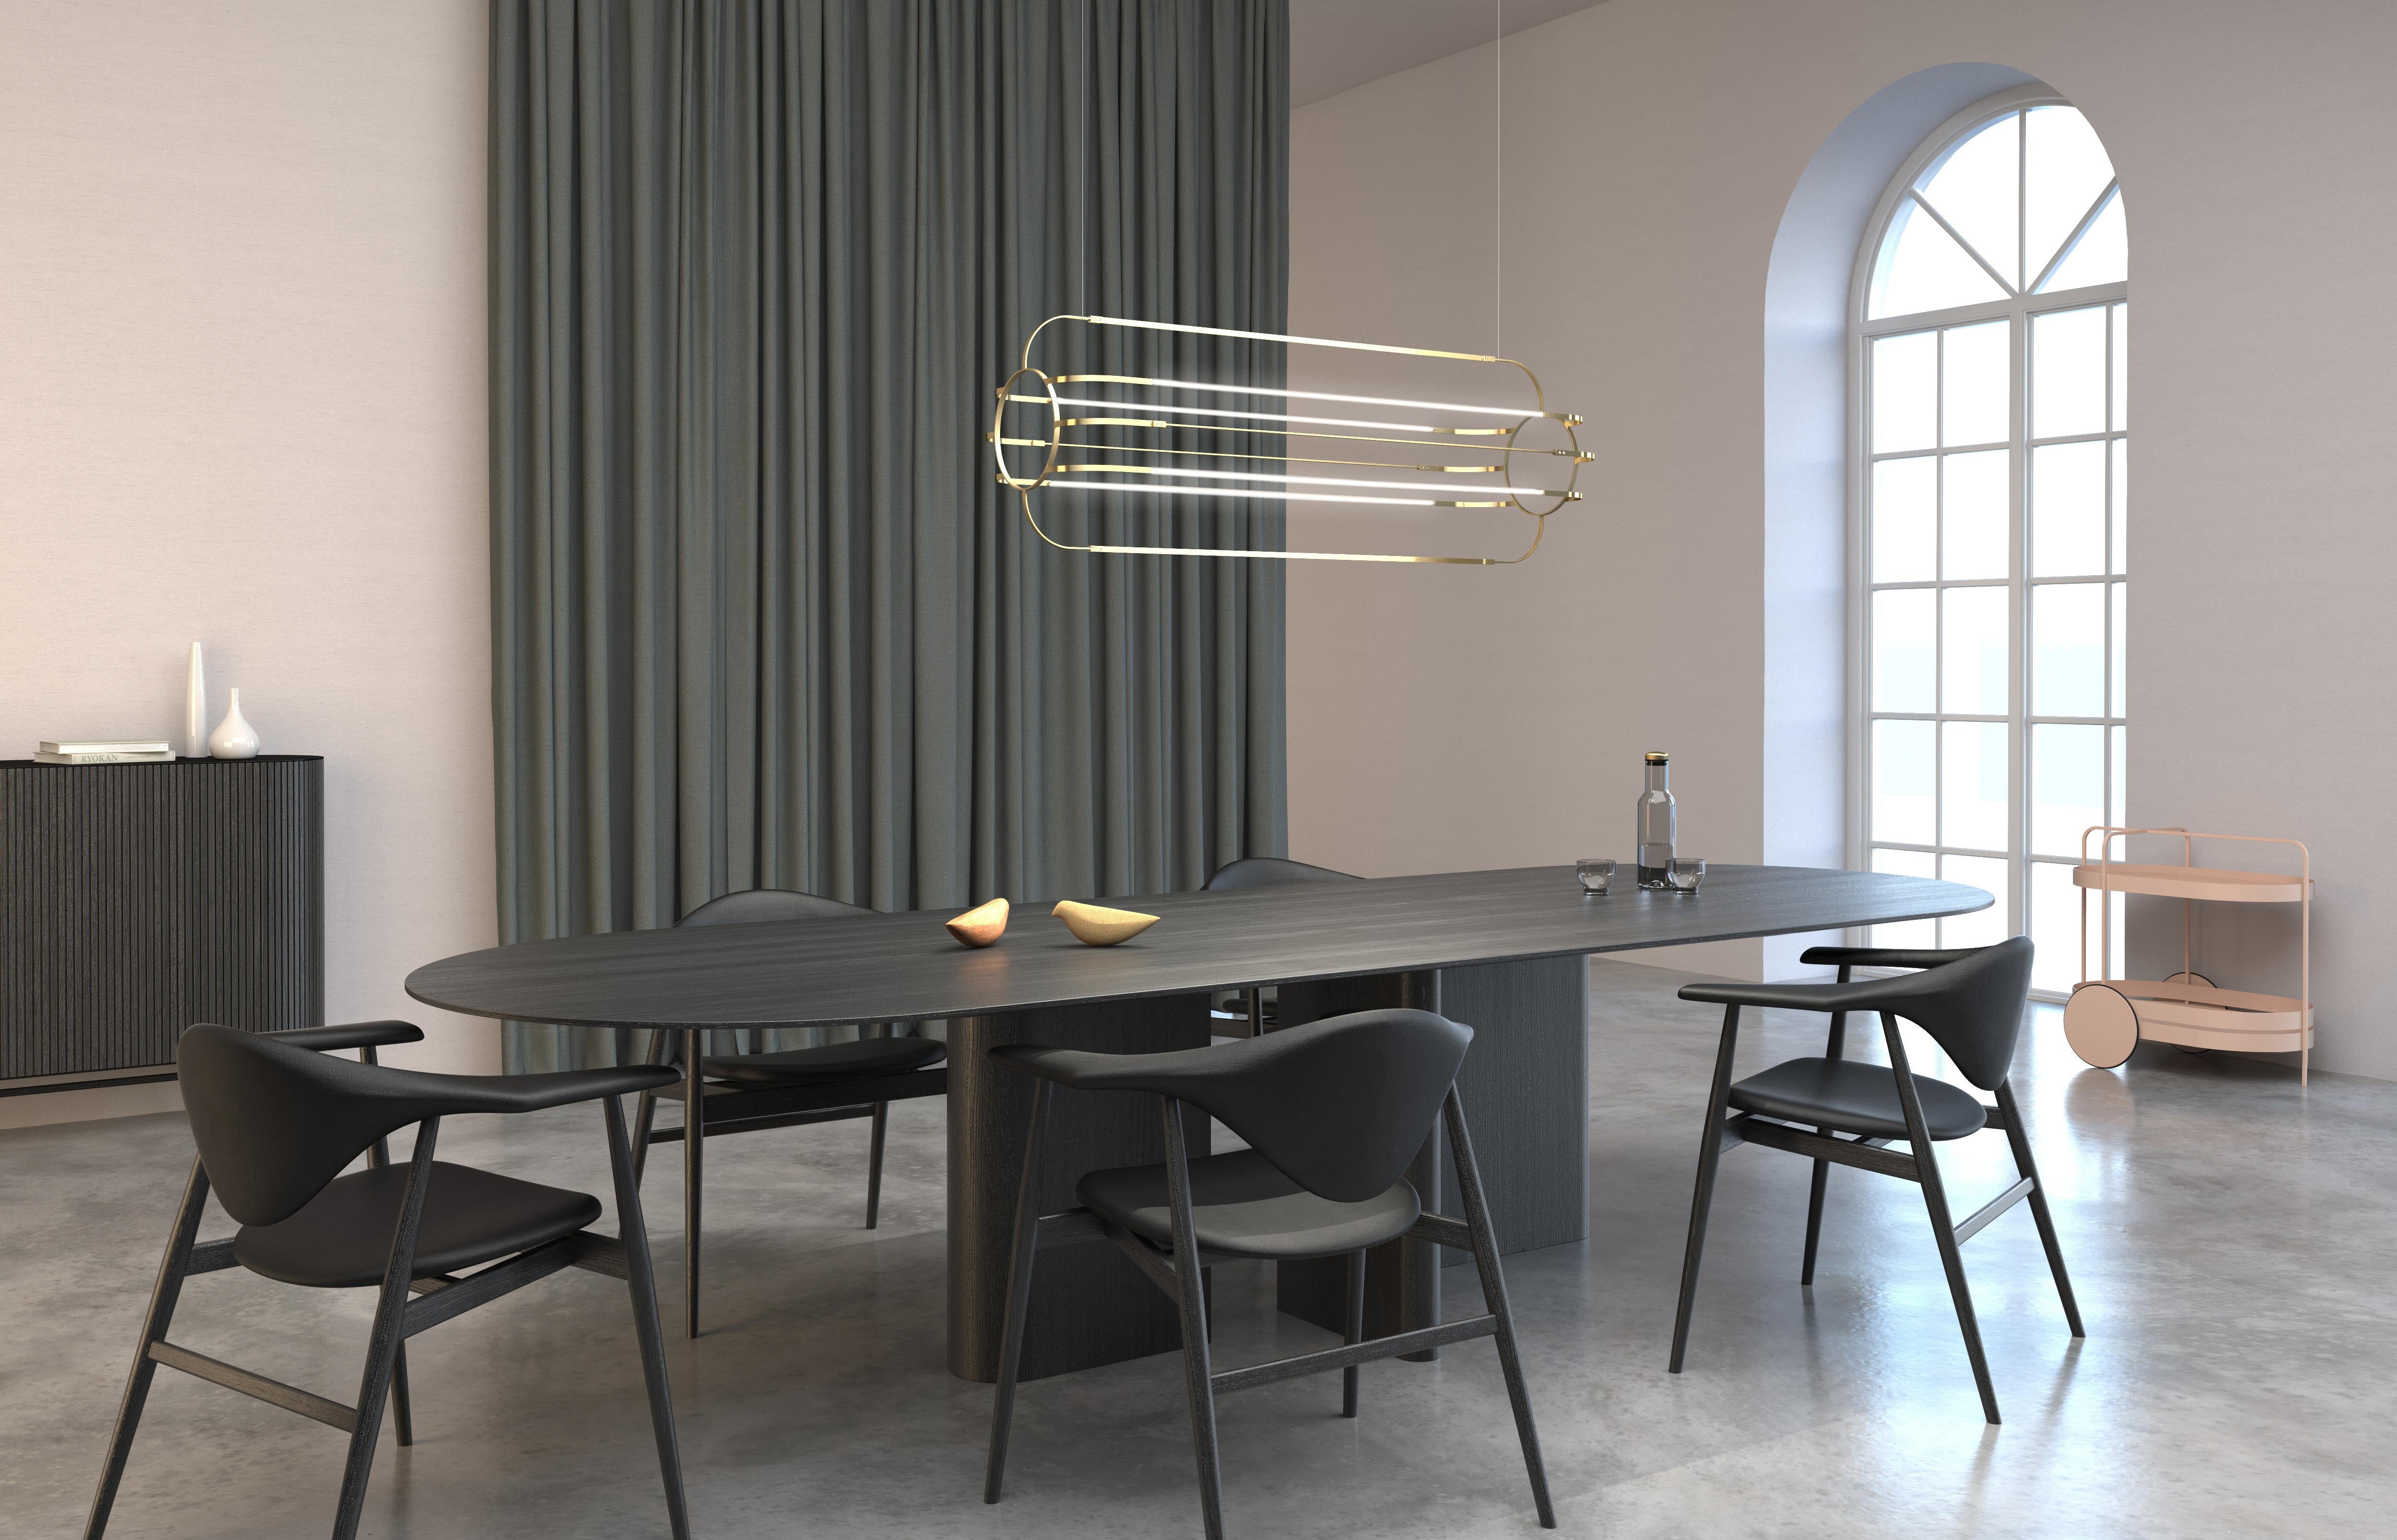 Large Daniel Becker 'Charlotte' brass sculptural chandelier for Moss Objects. Designed by Berlin luminary Daniel Becker, recipient of the prestigious German Design Award in 2019, the creation of the 'Charlotte' was inspired by the remaining traces